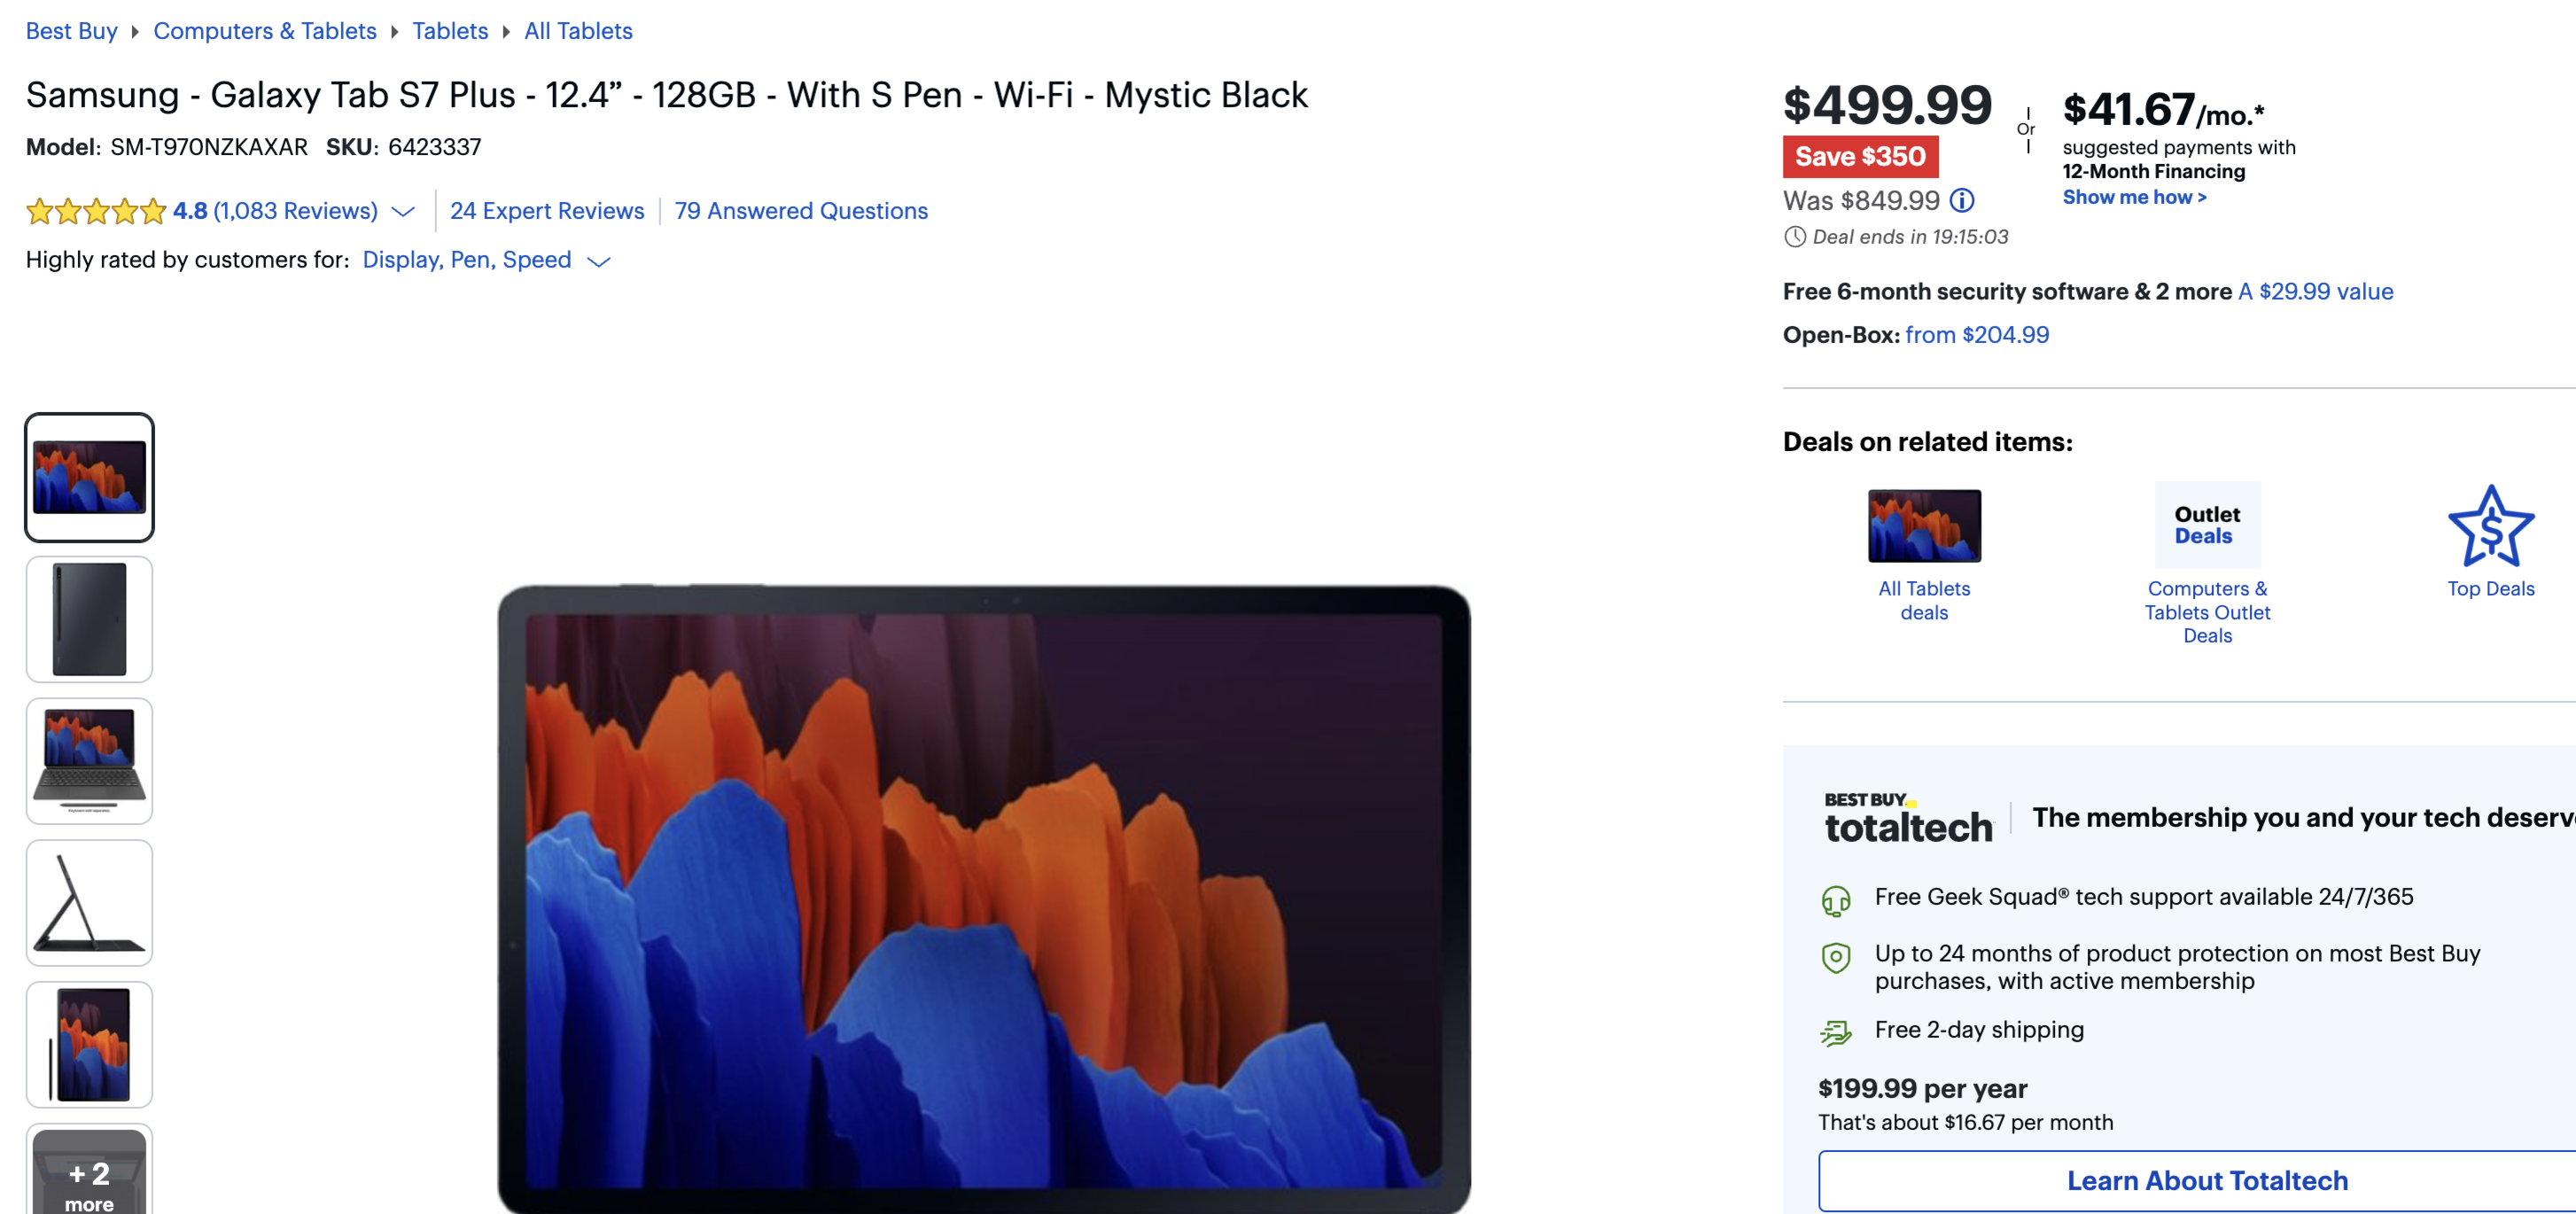 Bestbuy | Deal of the day | Samsung - Galaxy Tab S7 Plus - 12.4” - 128GB - With S Pen - Wi-Fi - Mystic Black $499